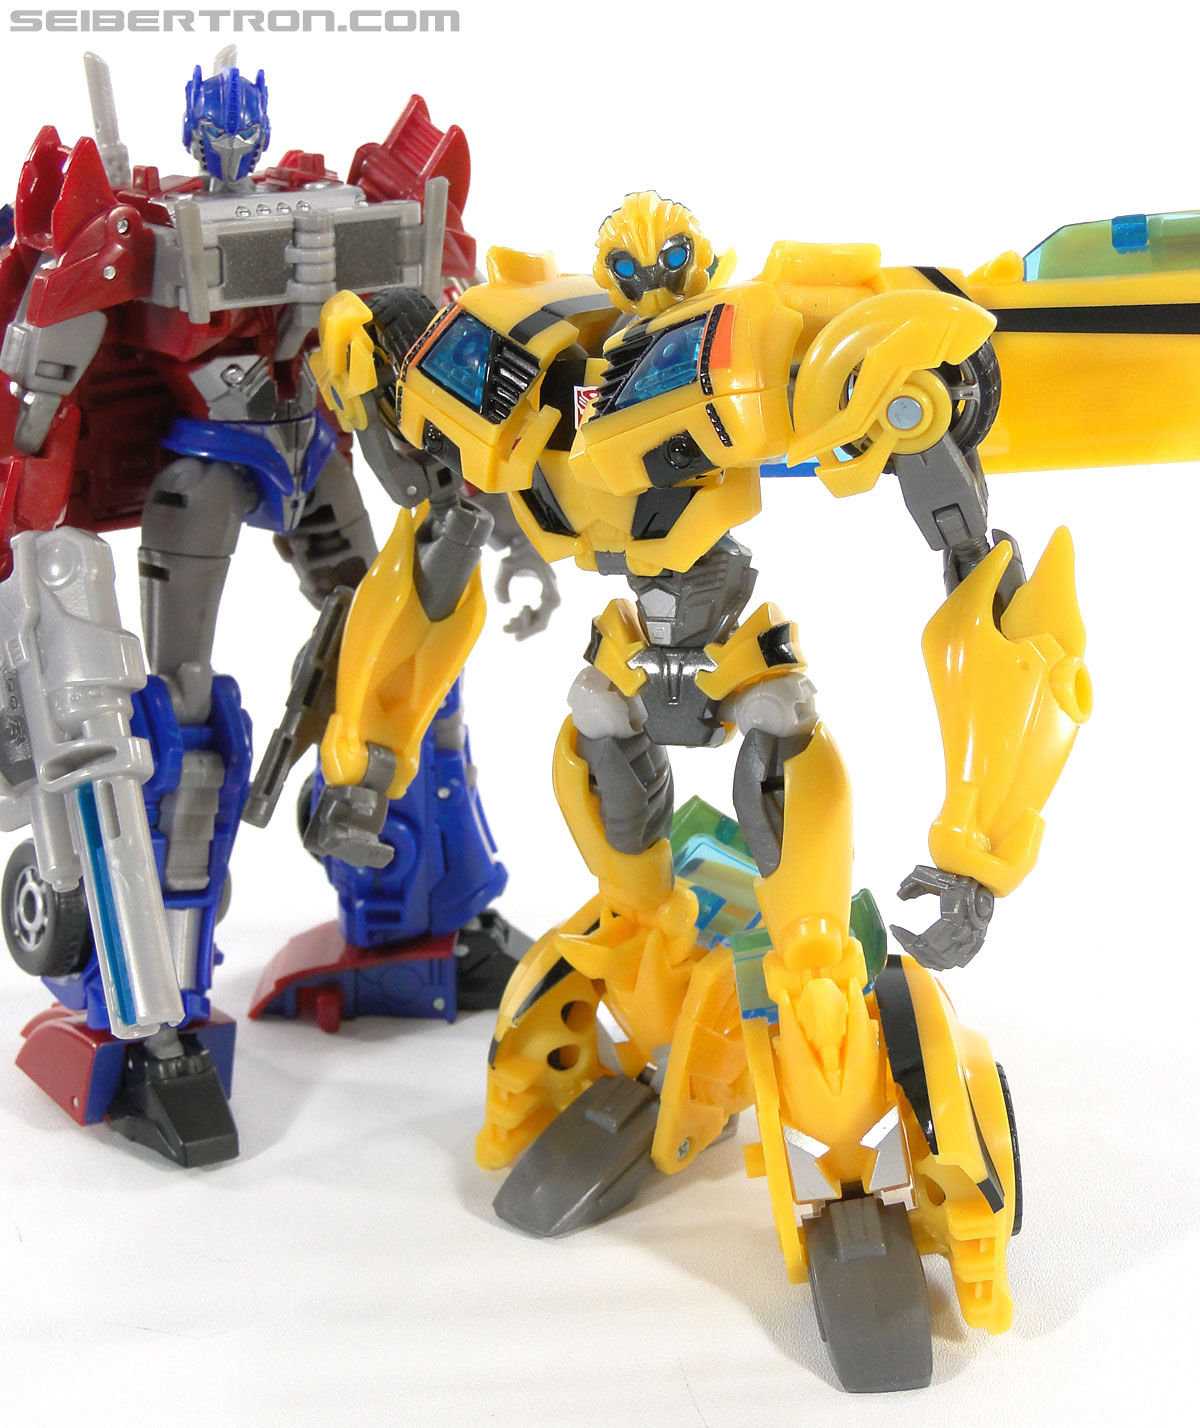 Transformers Prime: First Edition Bumblebee (Image #110 of 130)